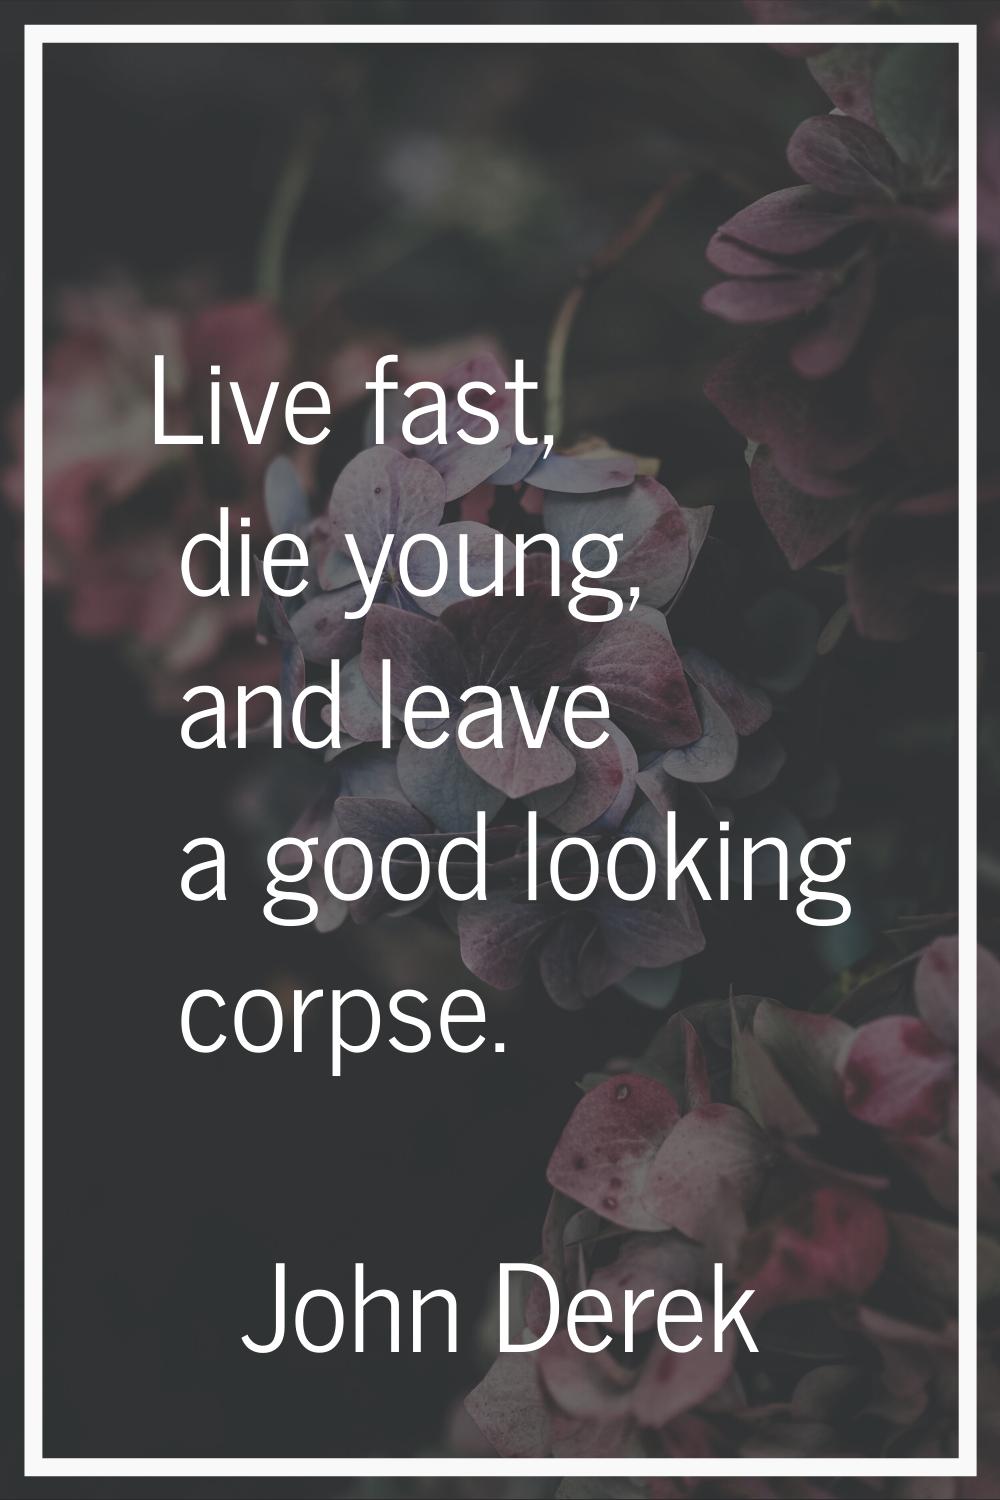 Live fast, die young, and leave a good looking corpse.